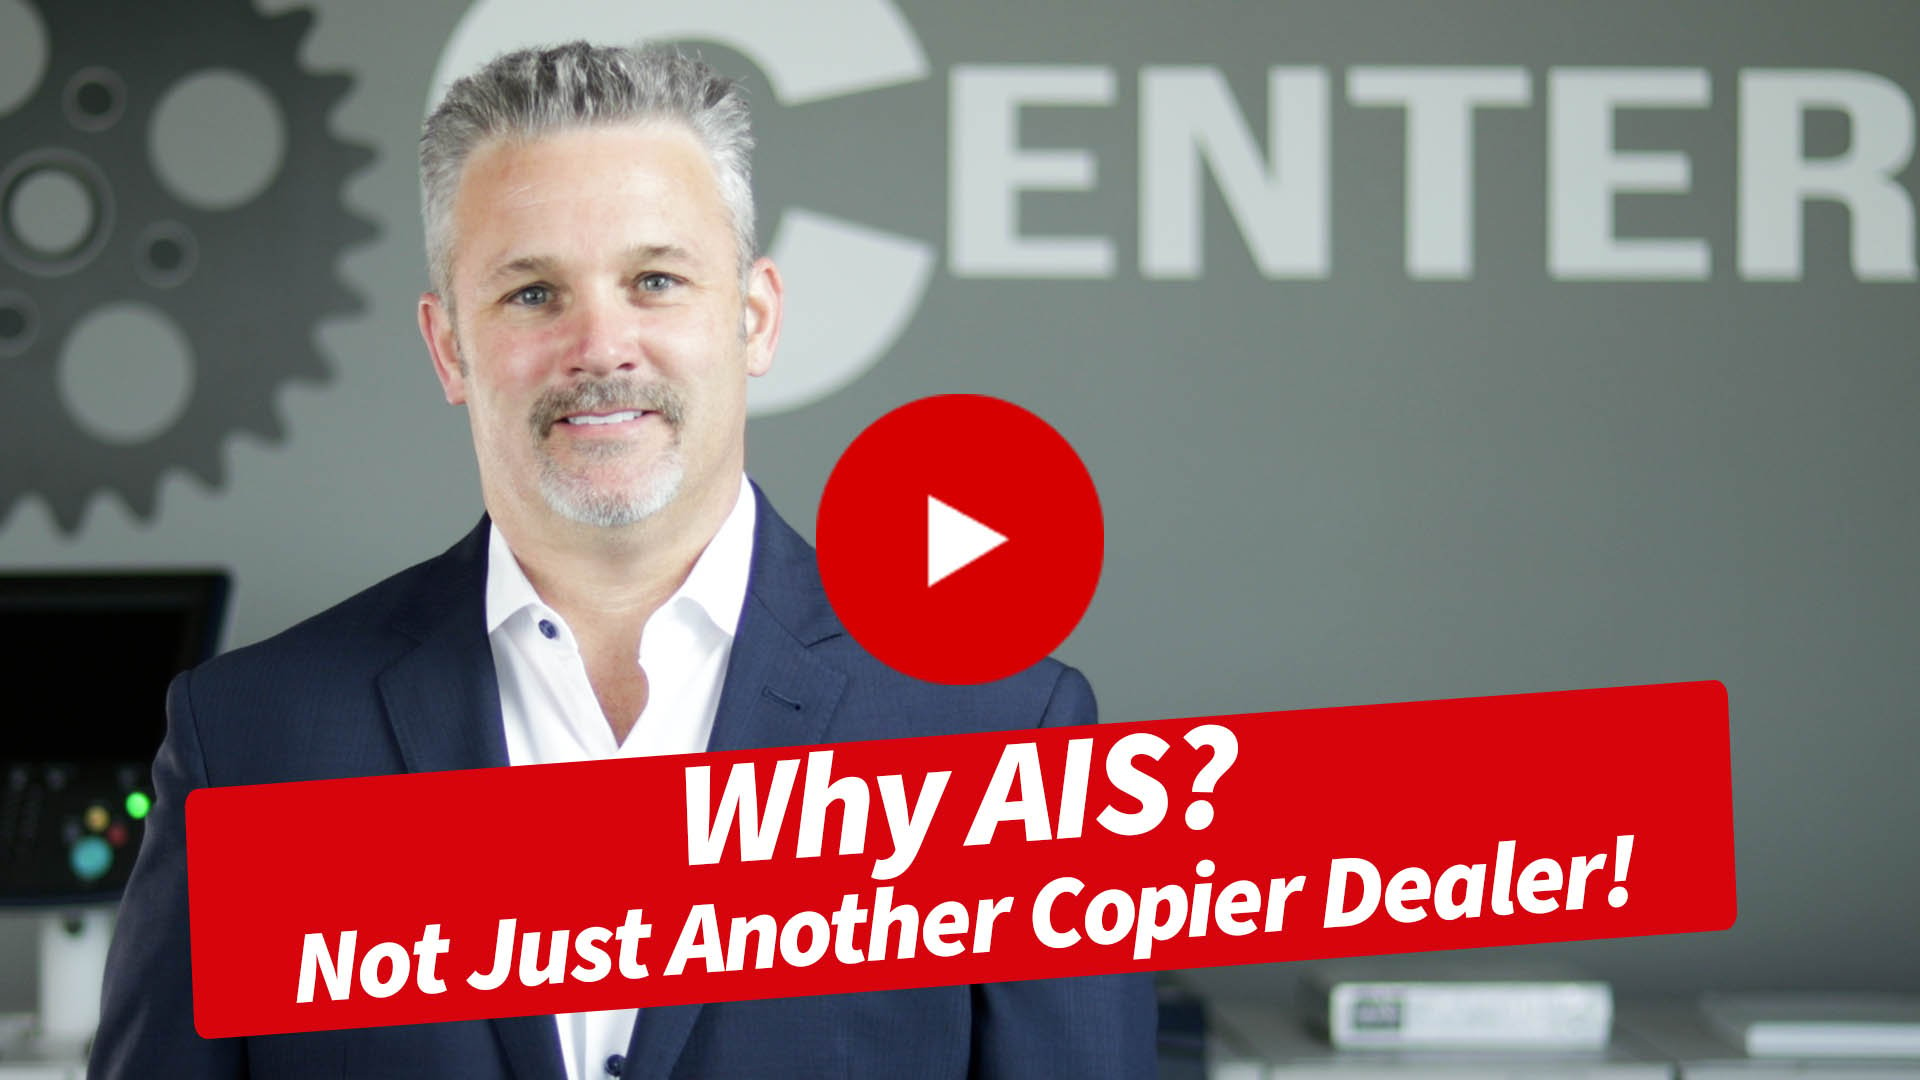 Why AIS? Not Just Another Copier Dealer